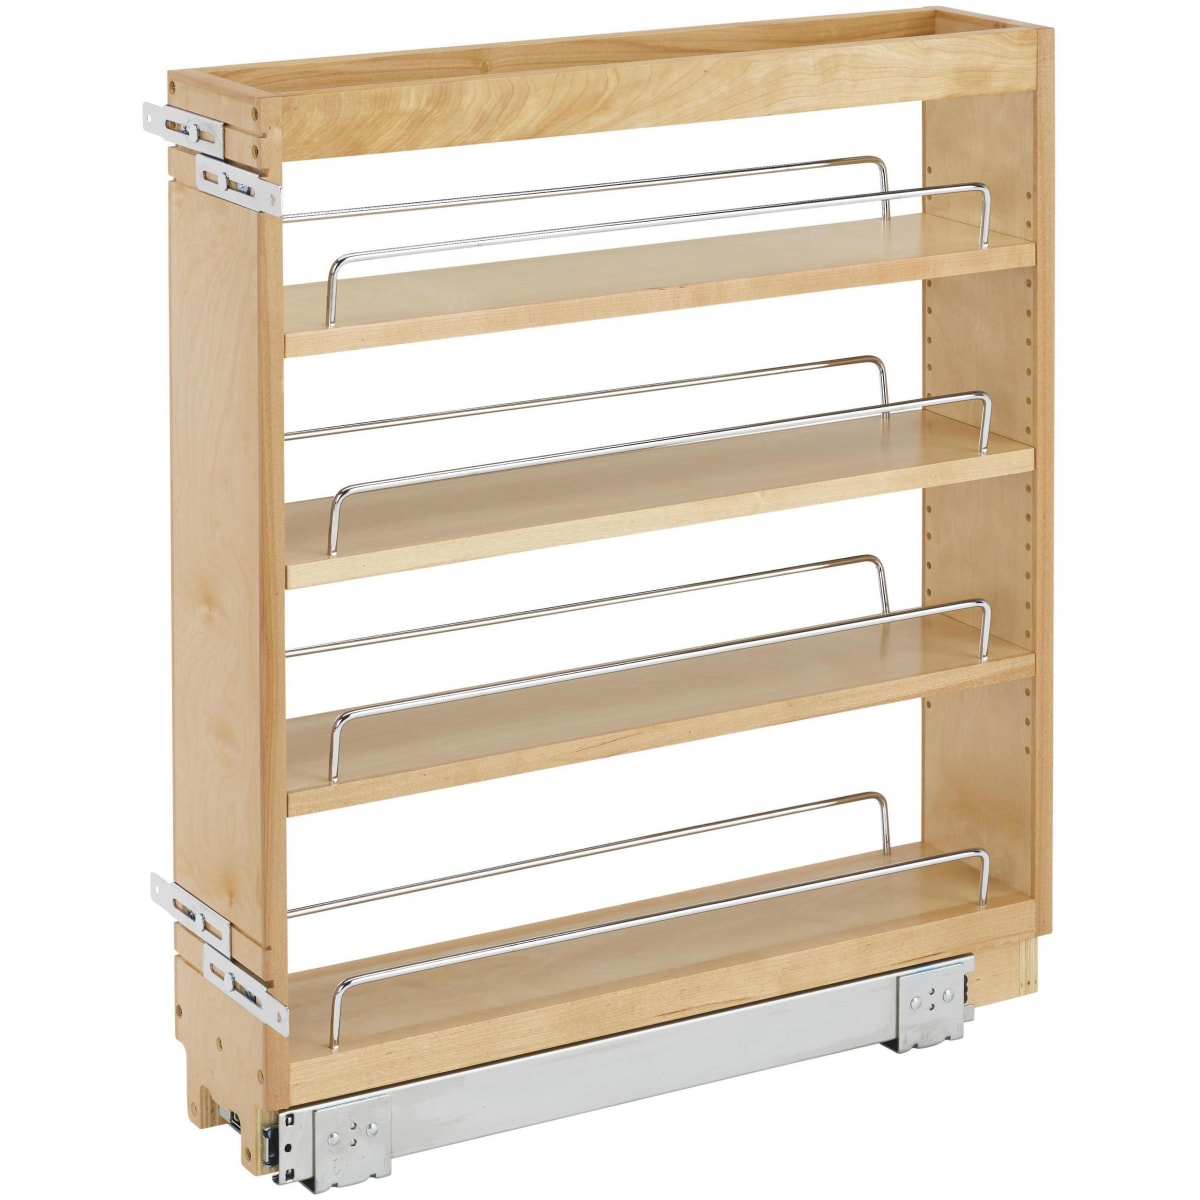 Rev-A-Shelf 5 Pull Out Vanity Storage Organizer for Base Cabinets